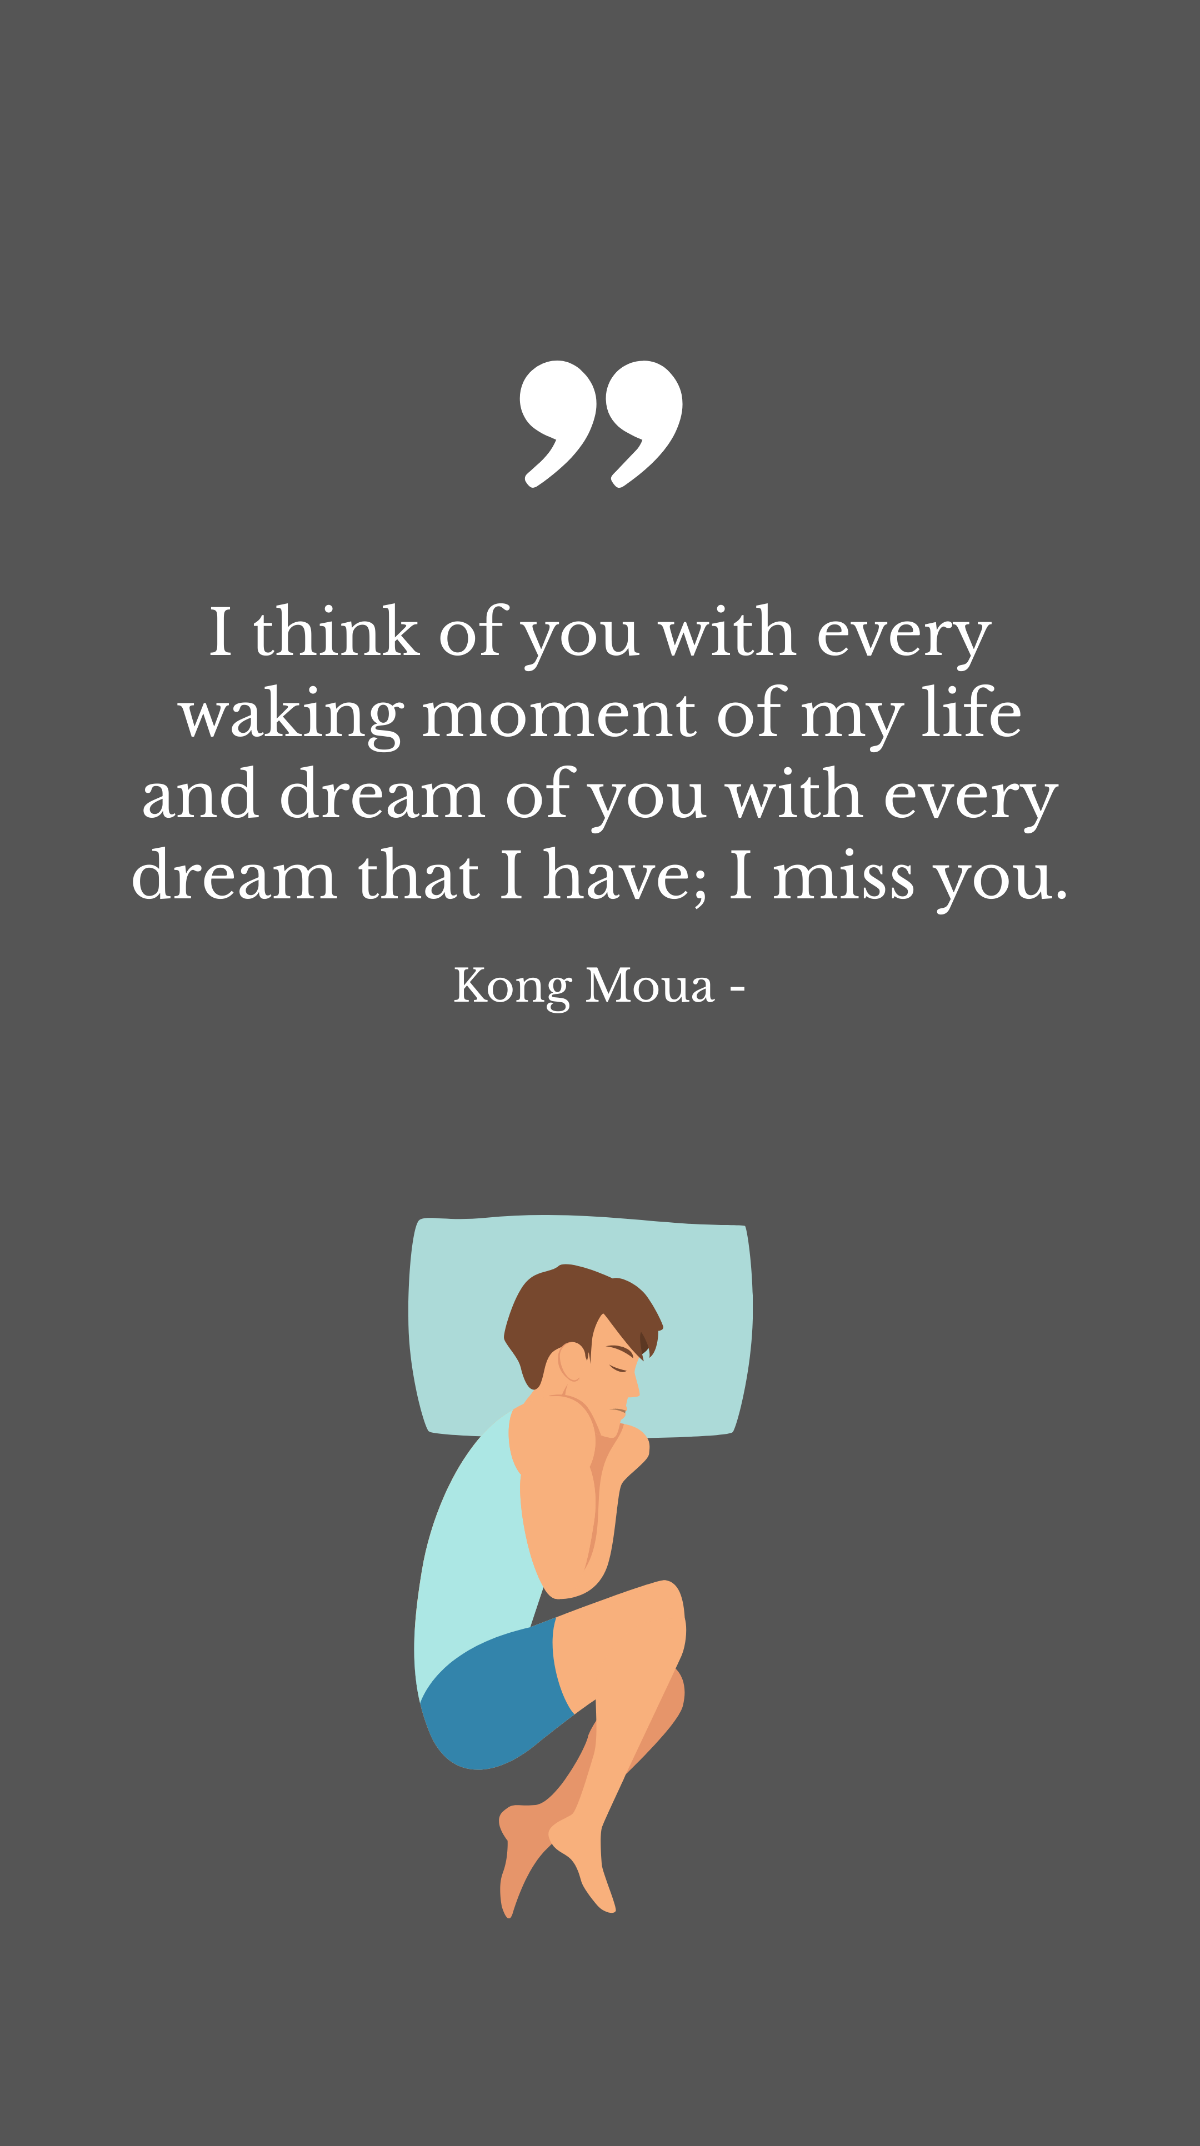 Kong Moua - I think of you with every waking moment of my life and dream of you with every dream that I have; I miss you. Template